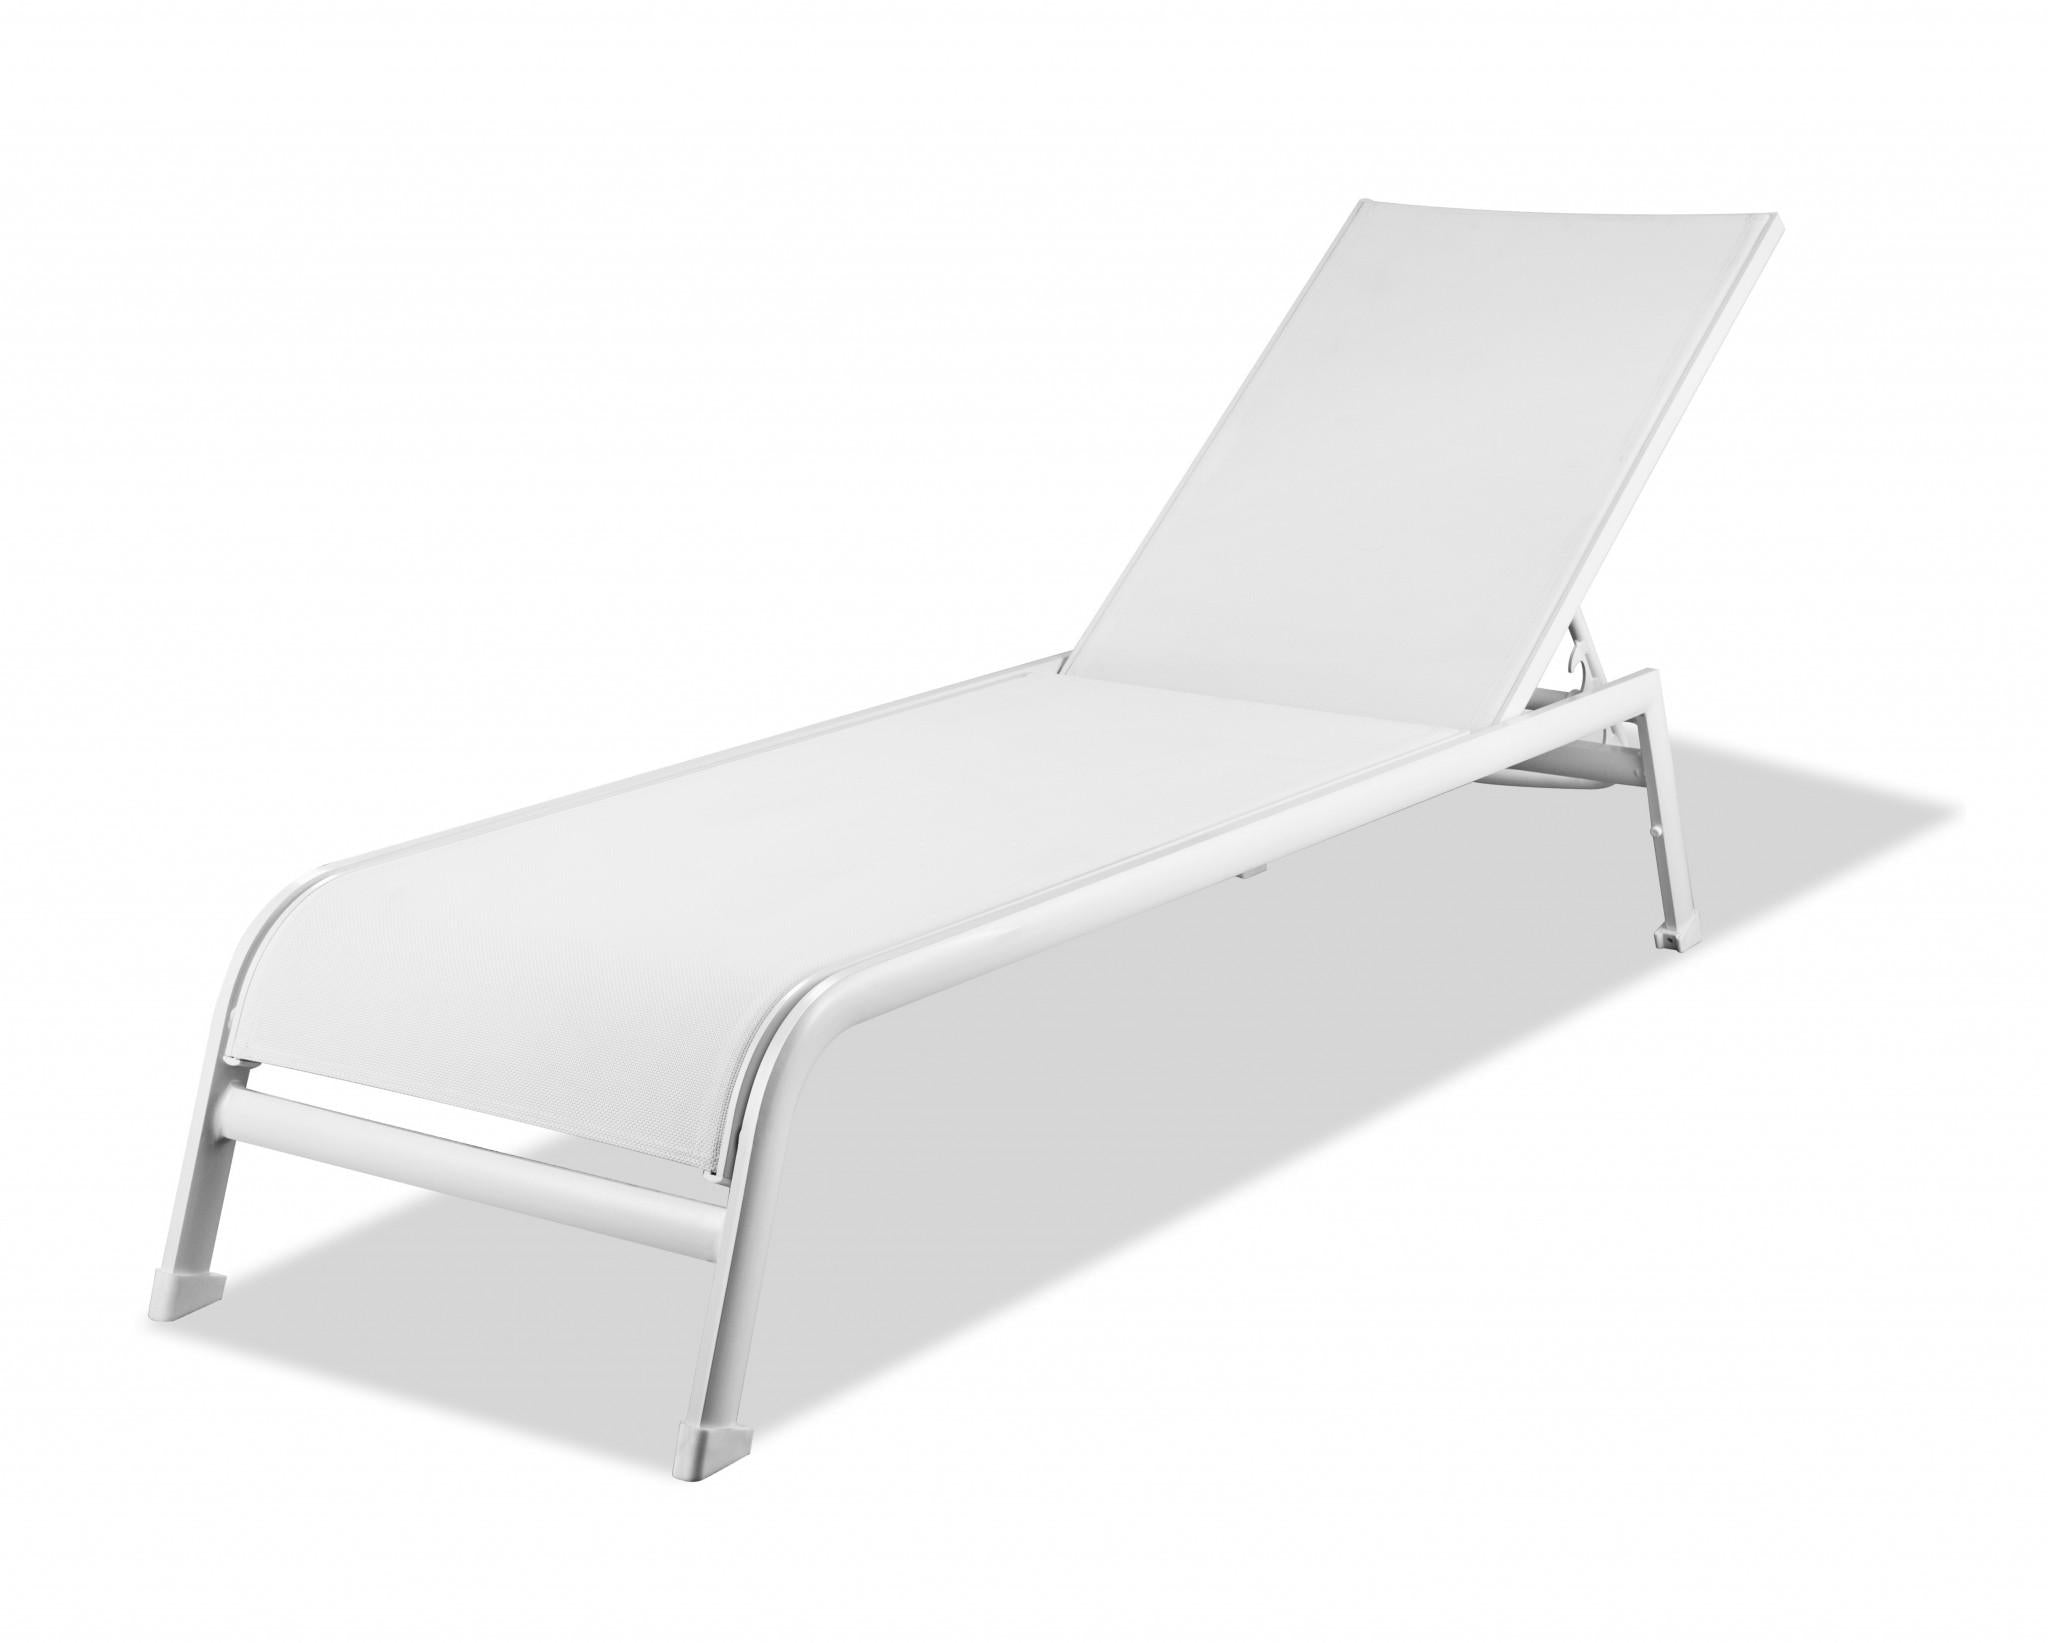 Set of 2 White Aluminum Chaise Lounges